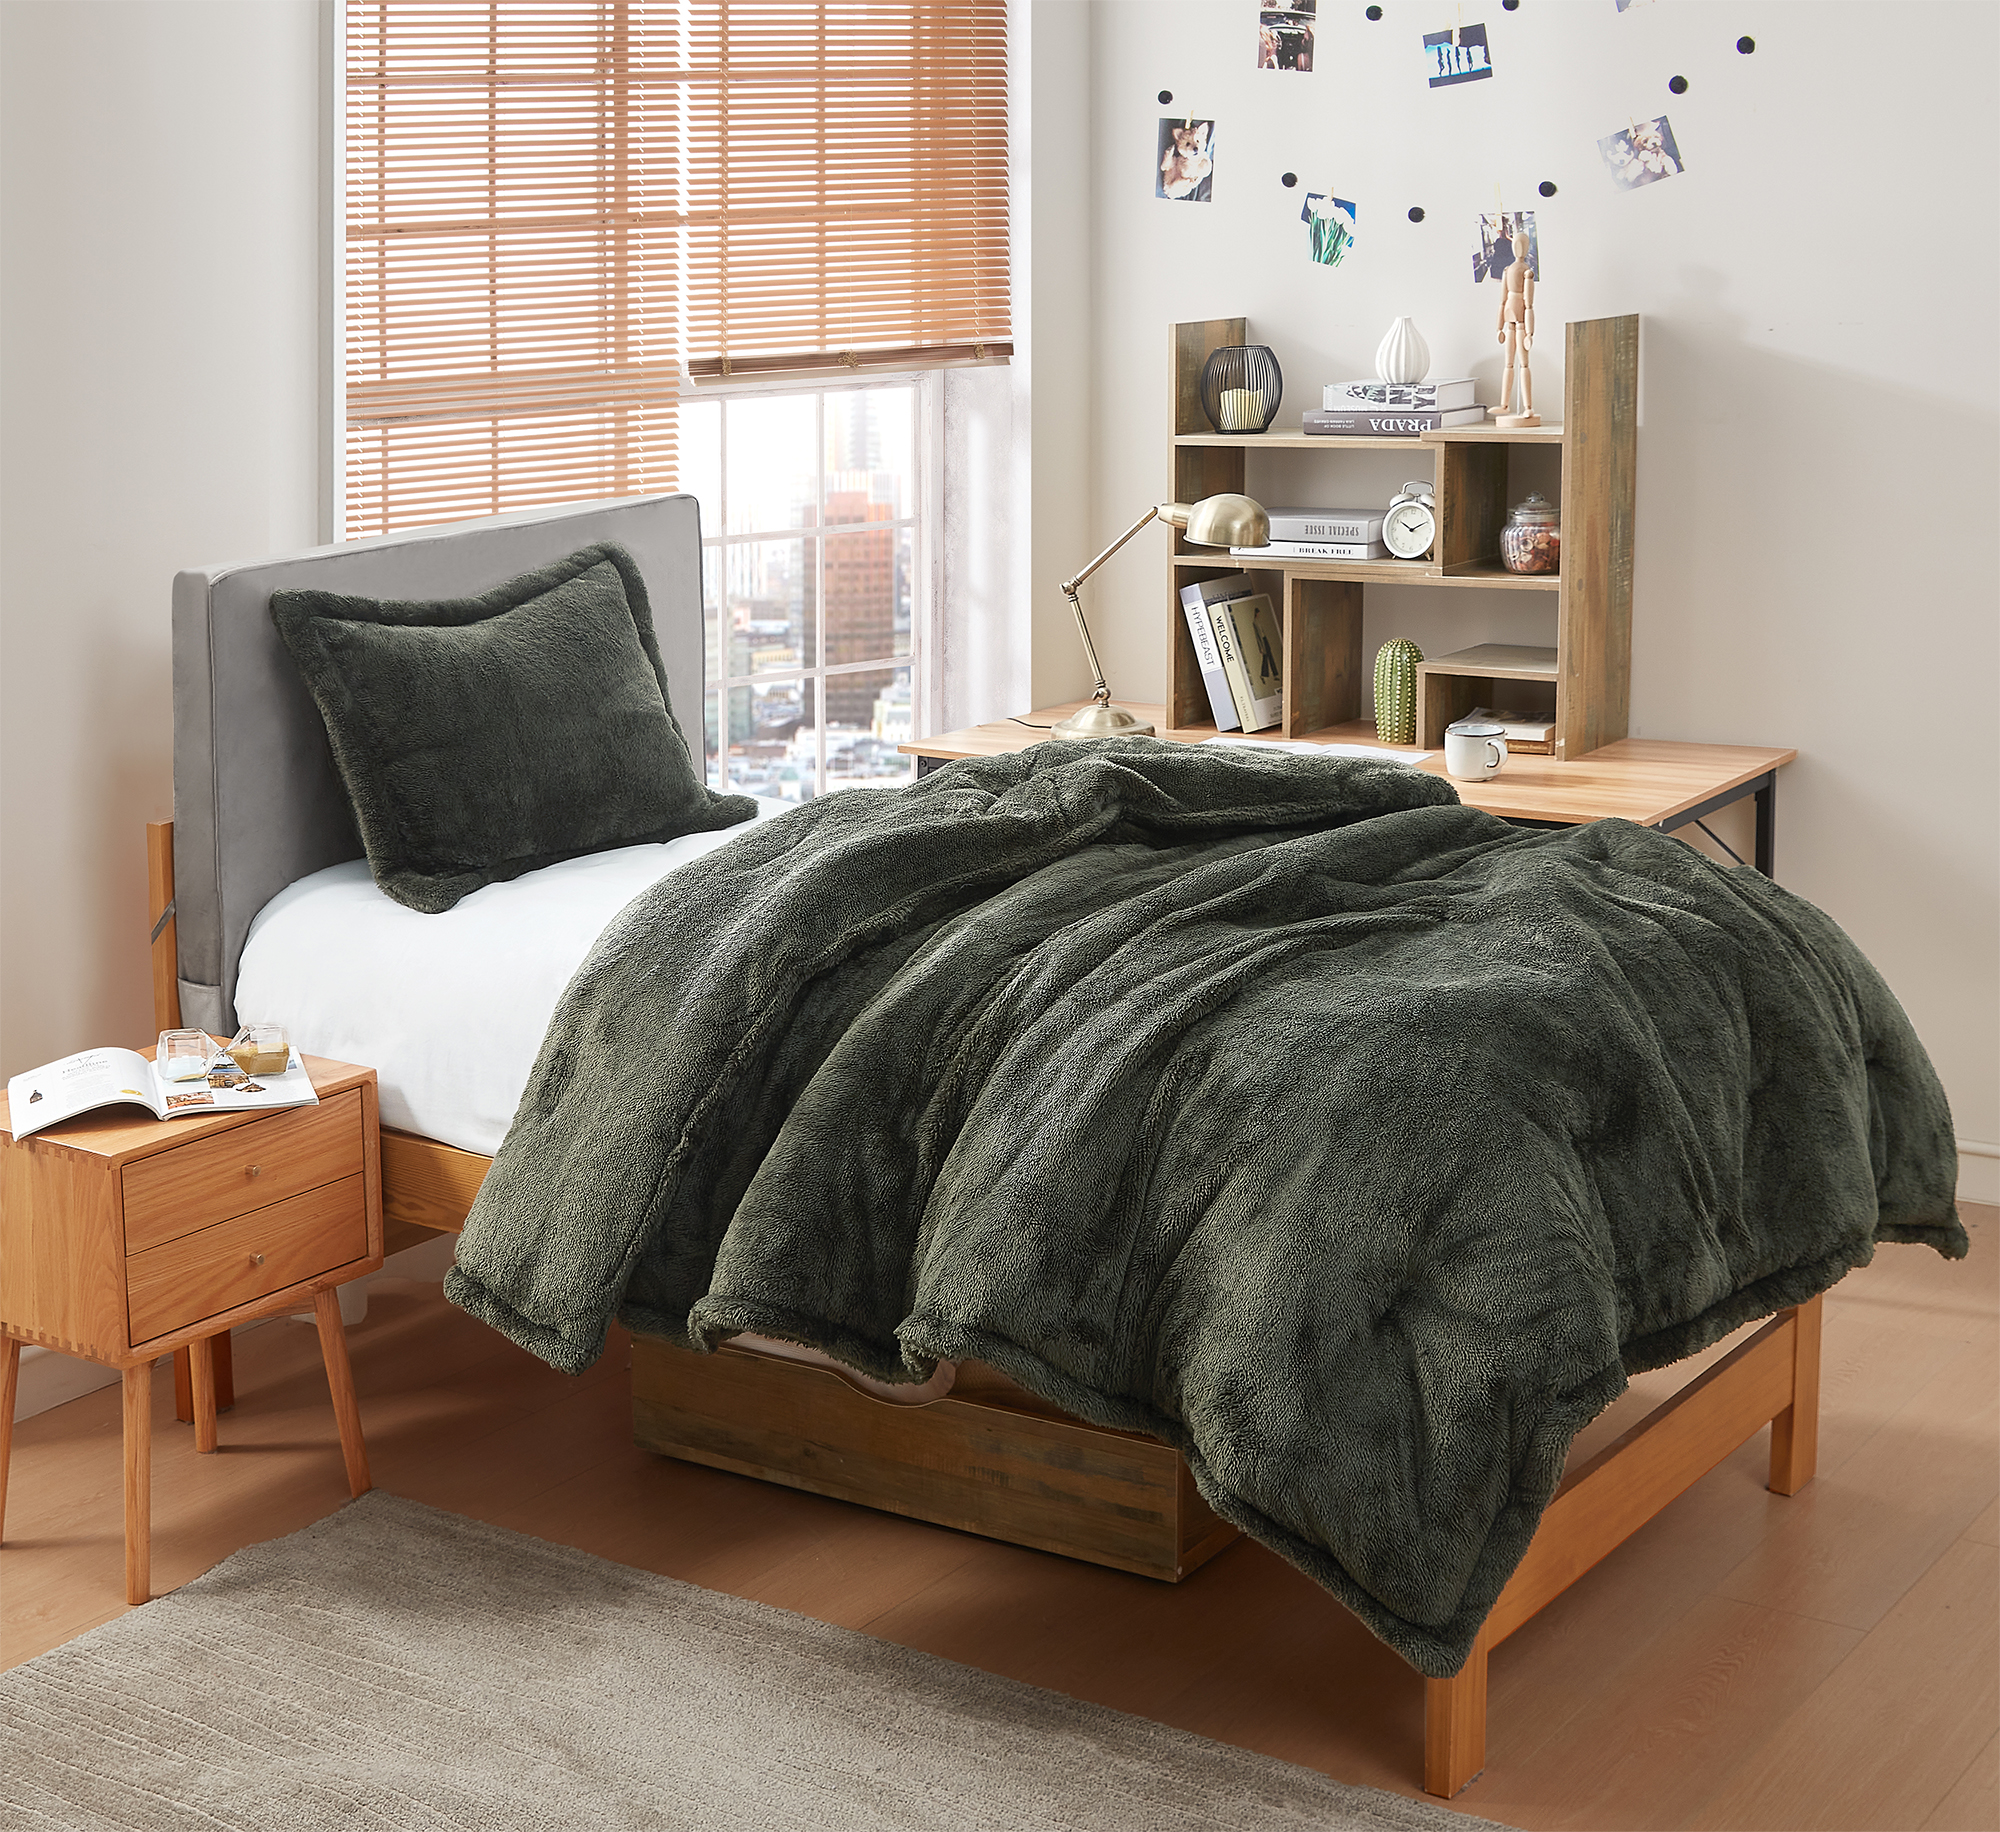 Extra Long and Extra Wide Twin Comforter Made with Cozy Plush Bedding Materials